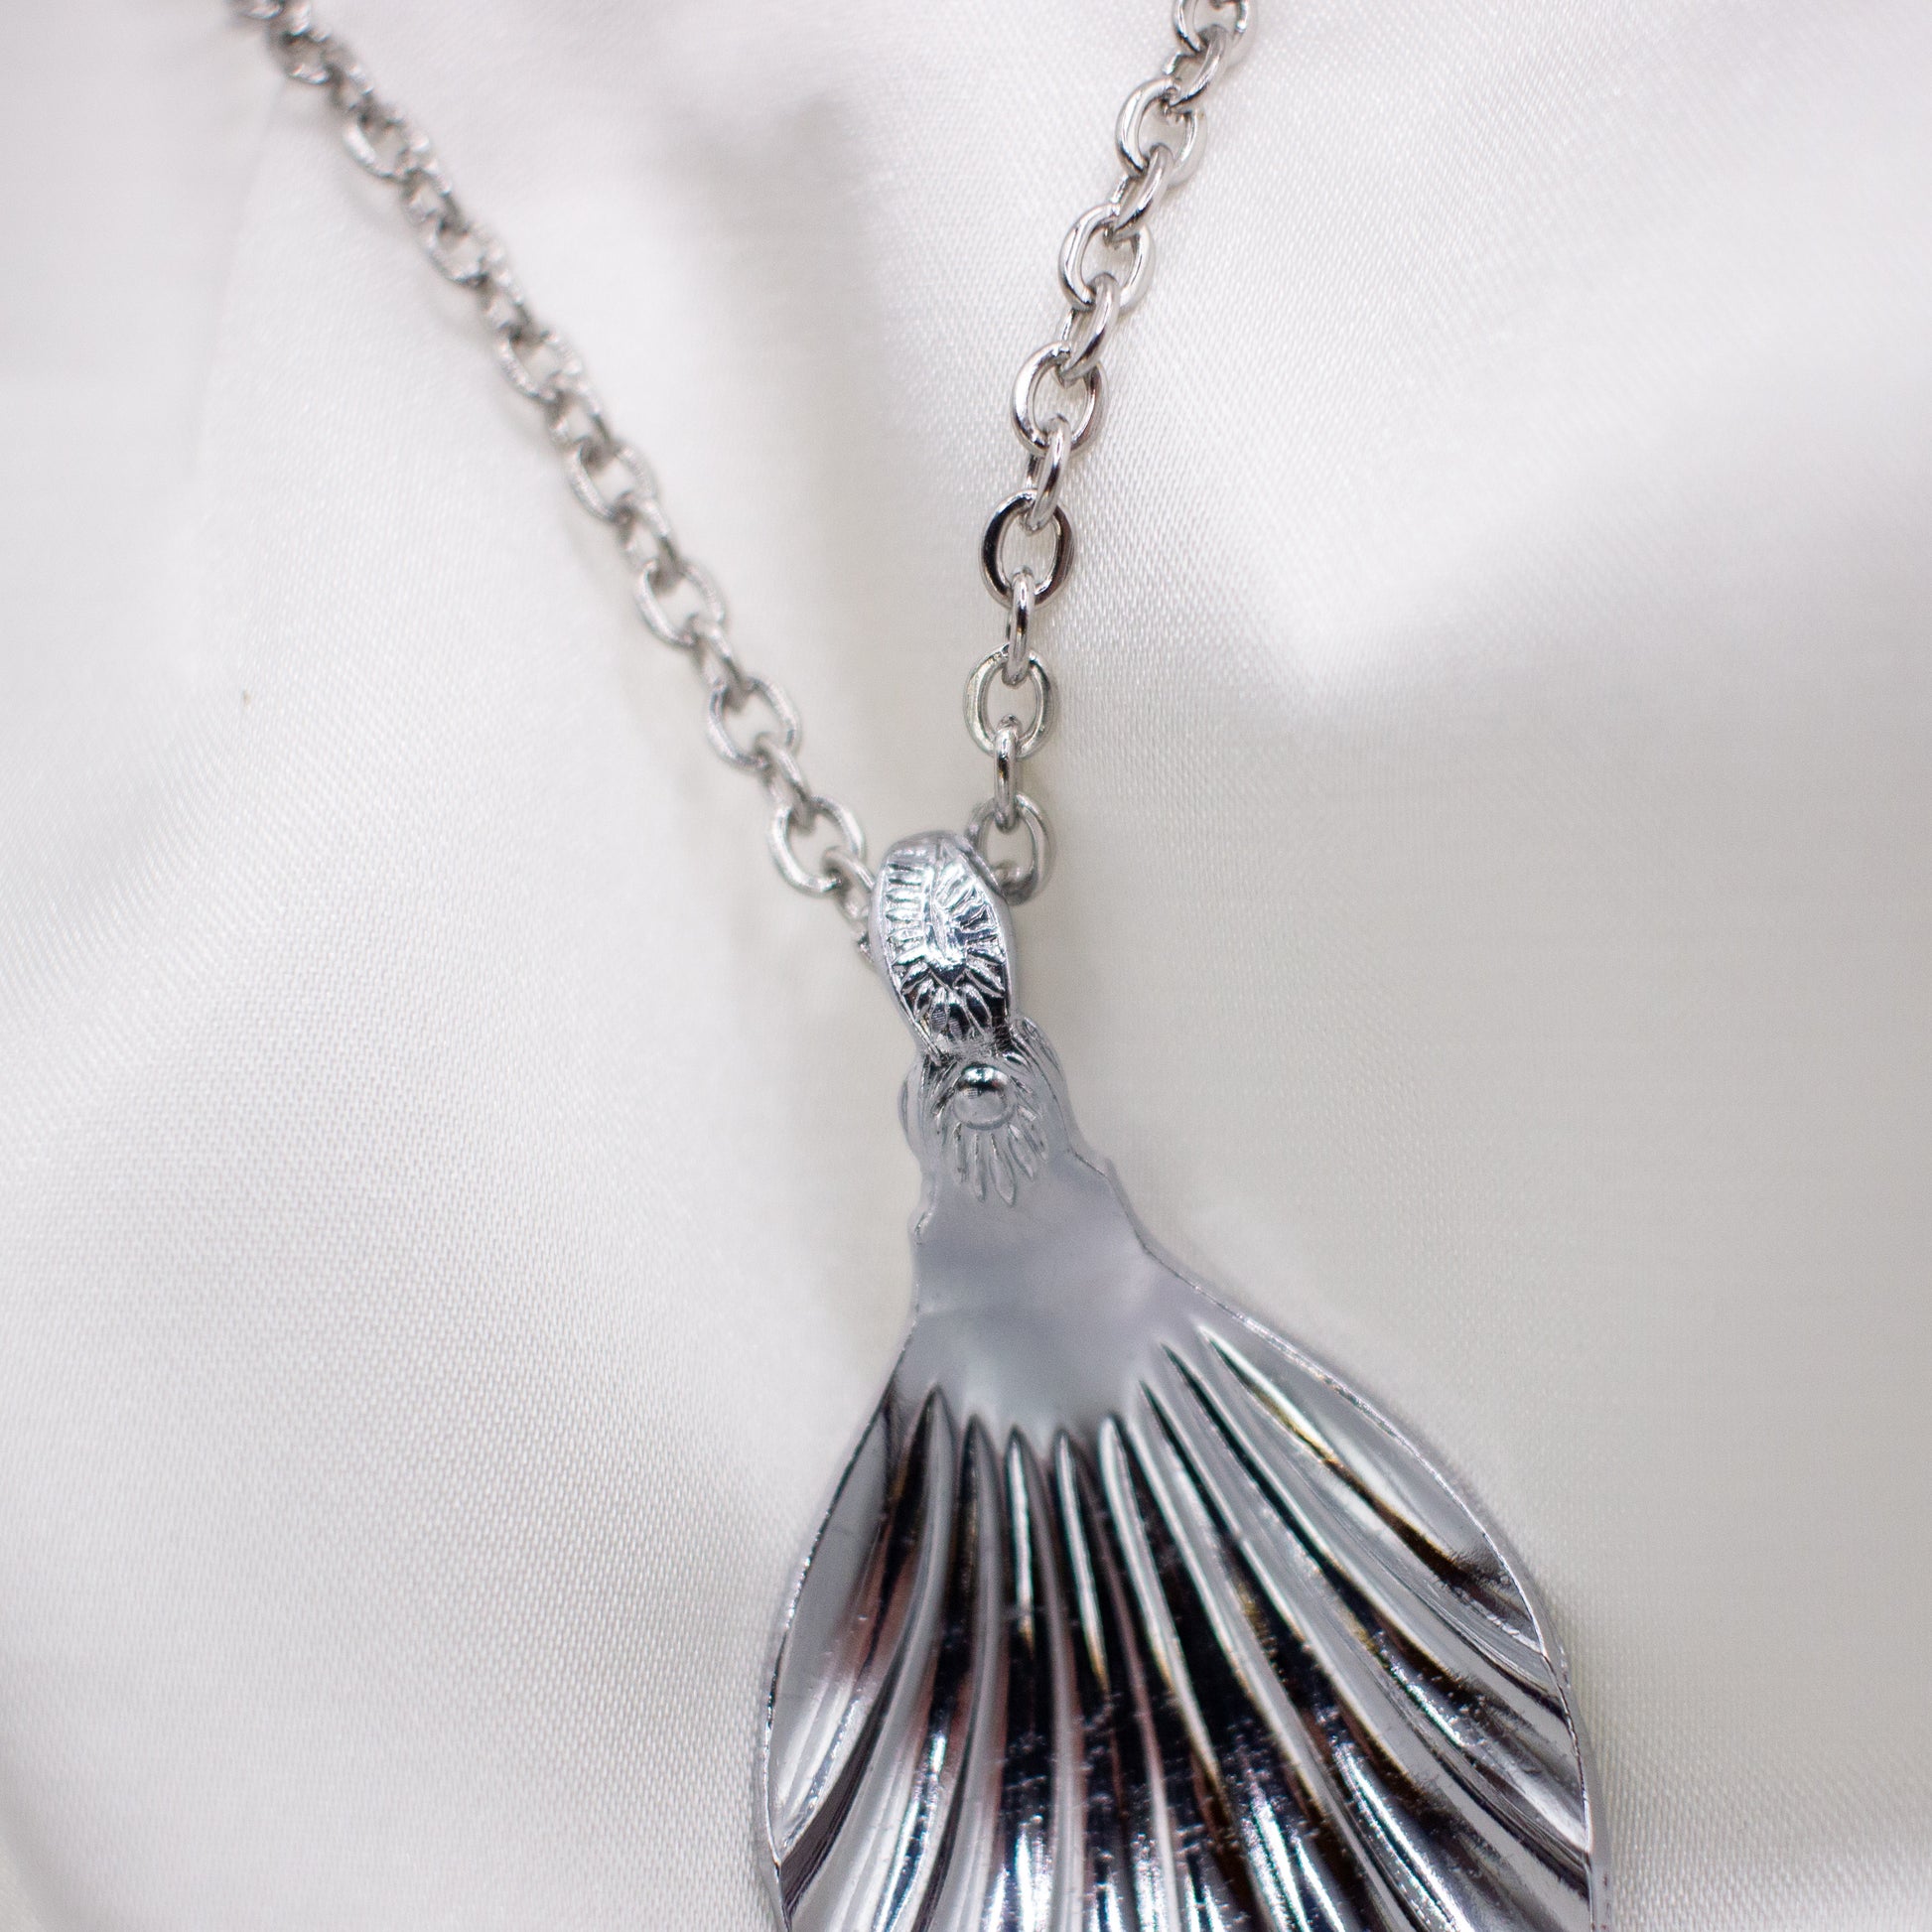 spoon necklace against a white background